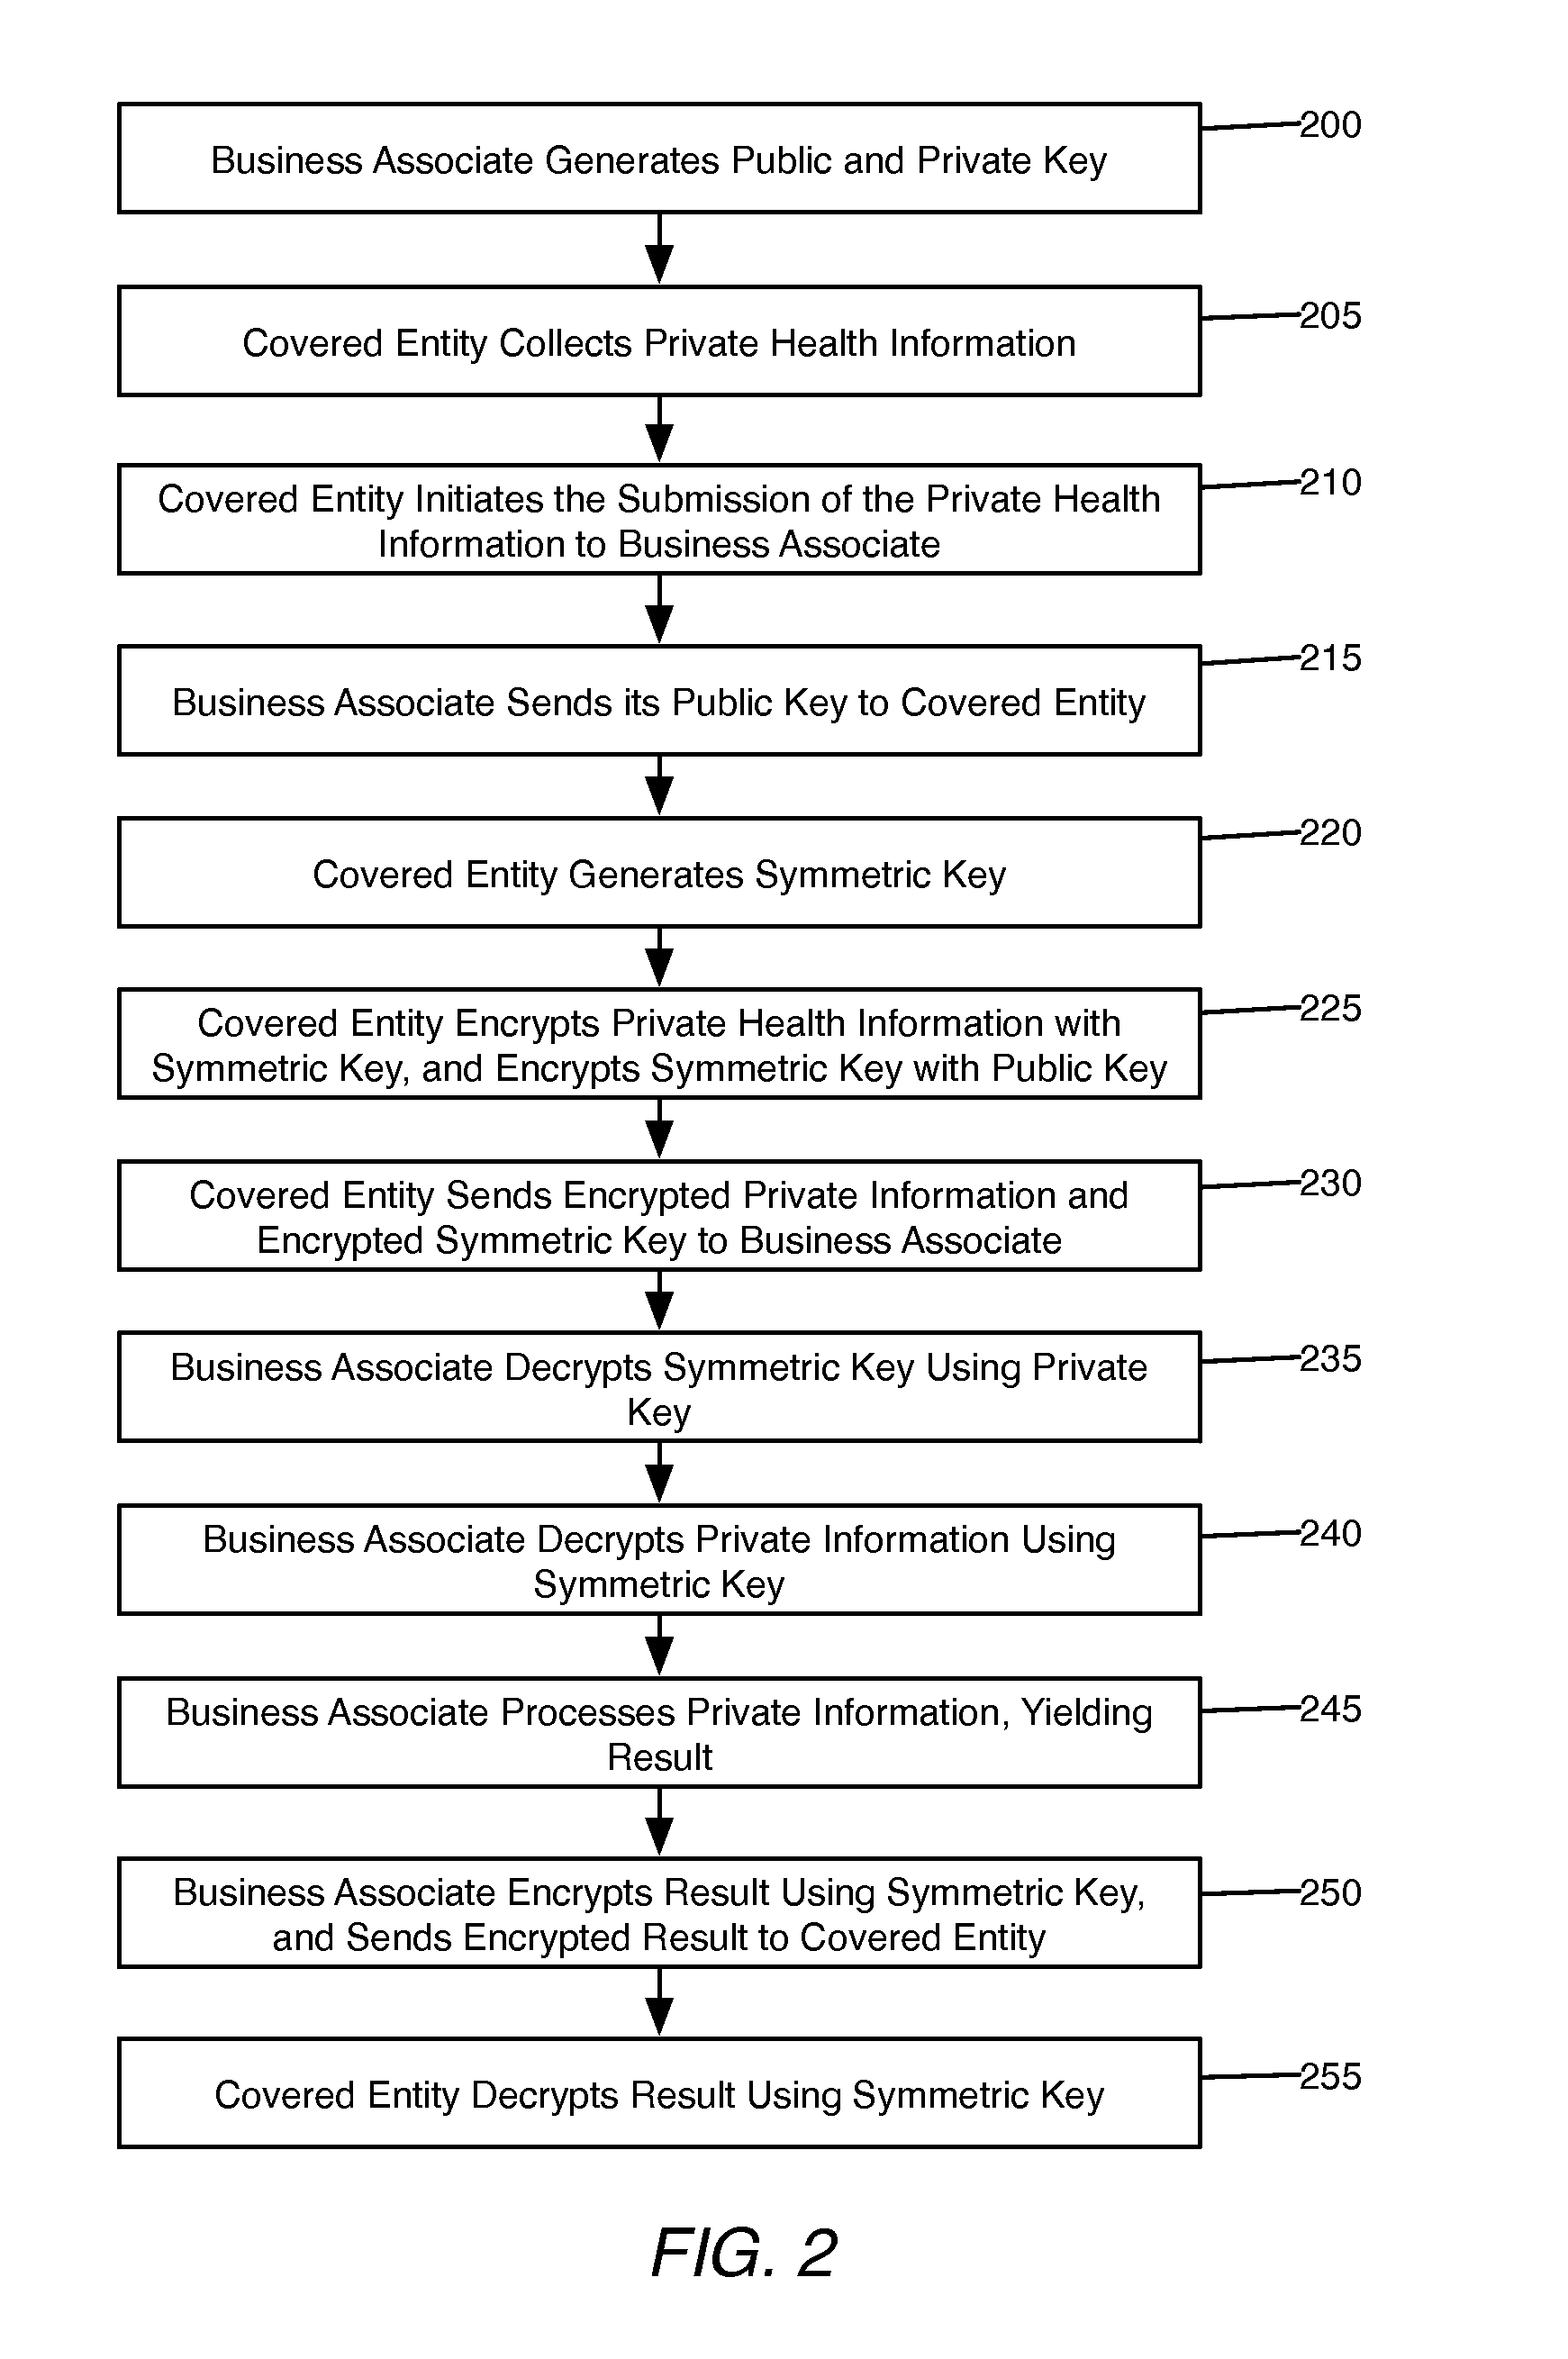 System and Method of Securing Private Health Information